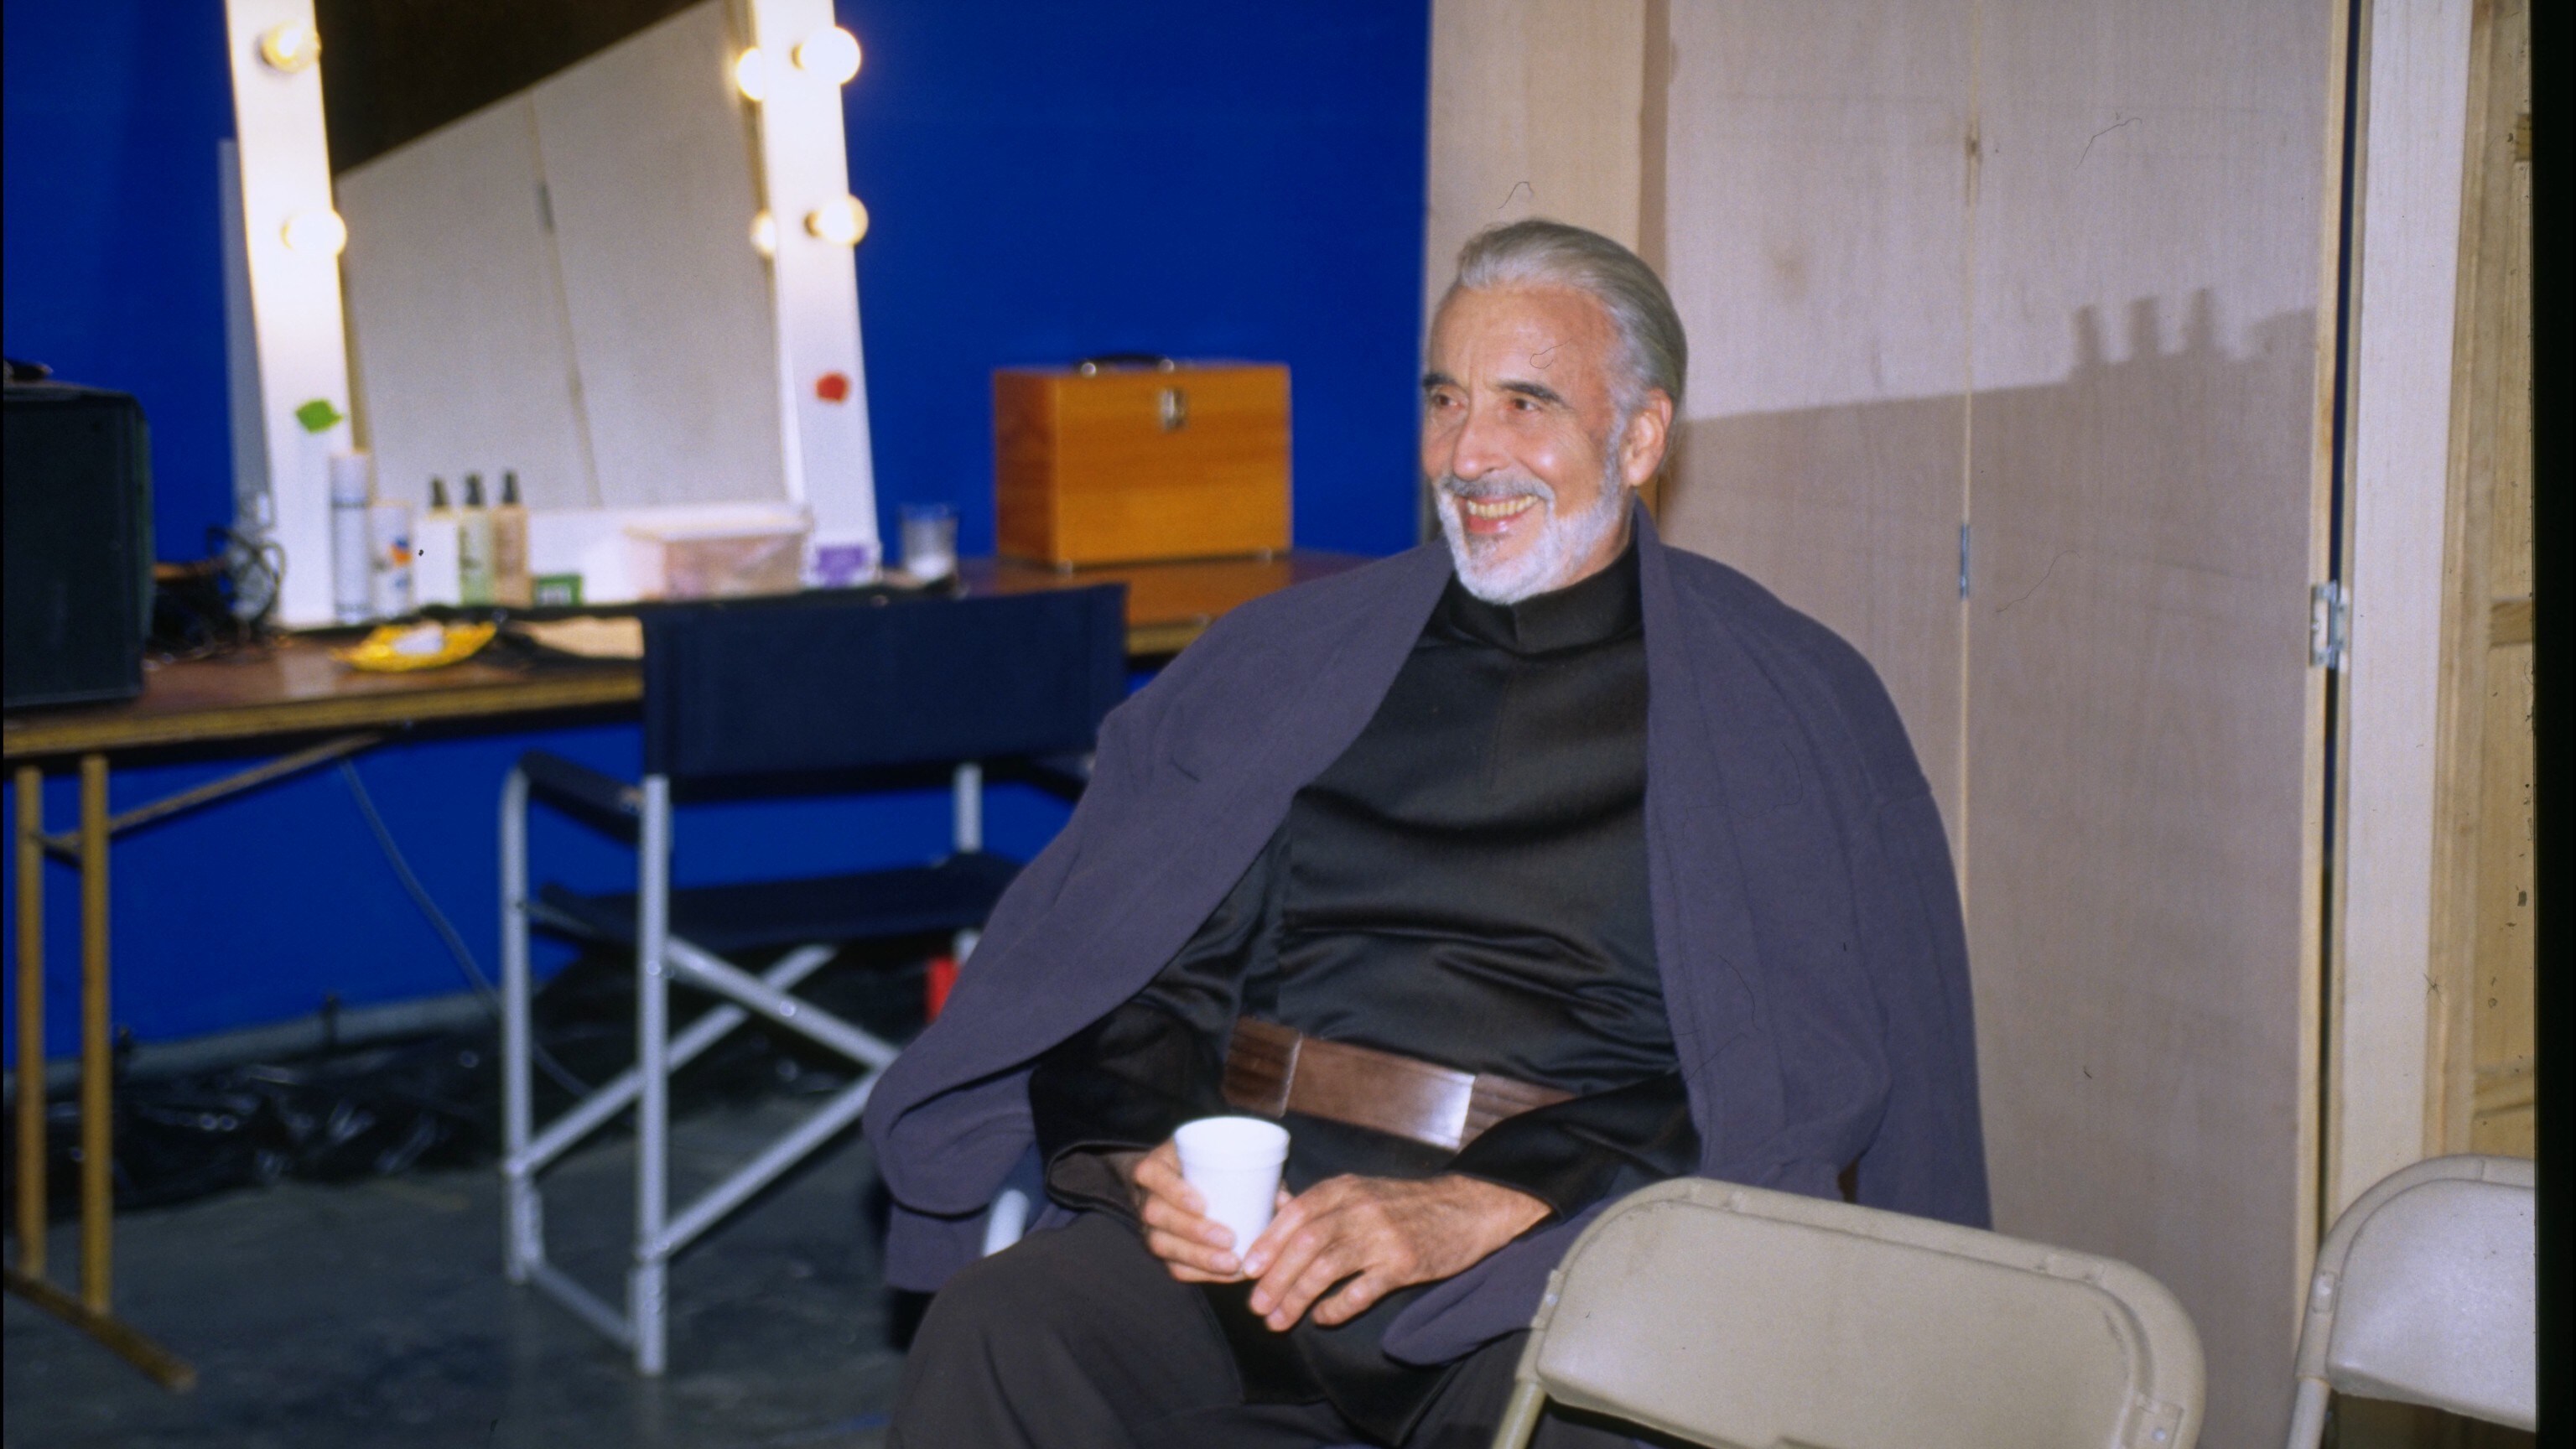 Christopher Lee relaxes on the Attack of the Clones set